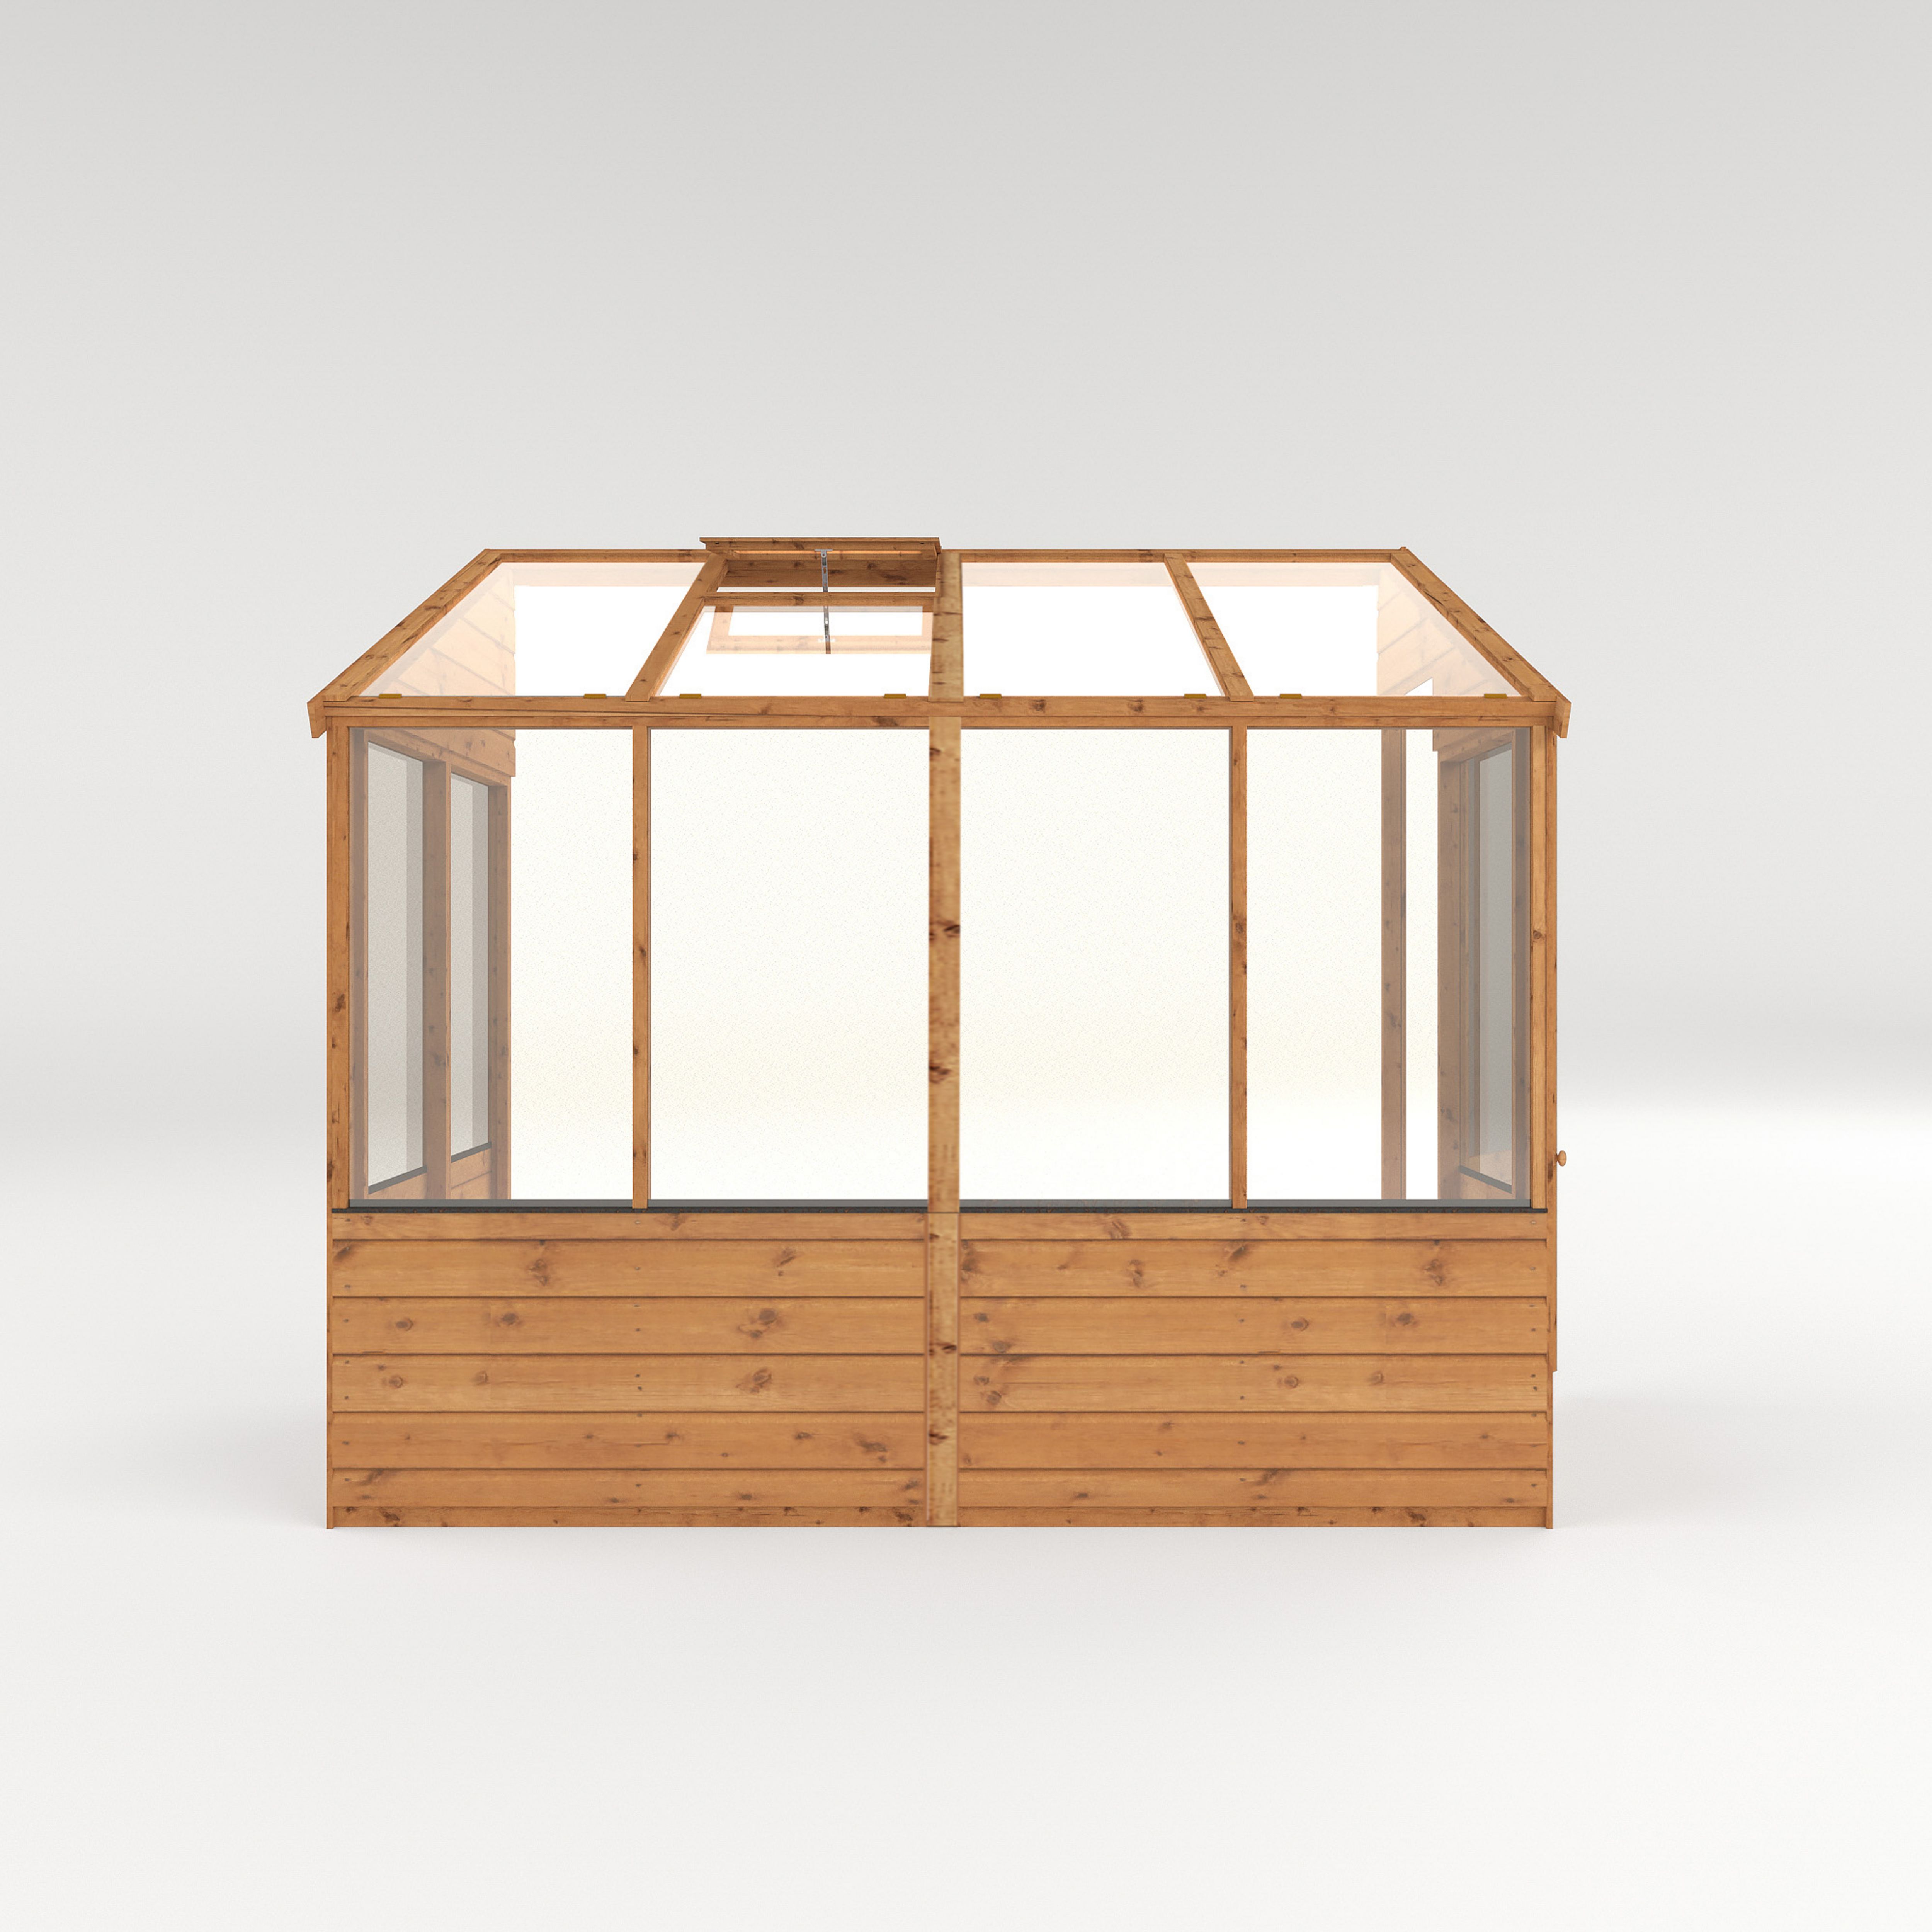 Mercia 8x4 Lean to greenhouse with Flap vent